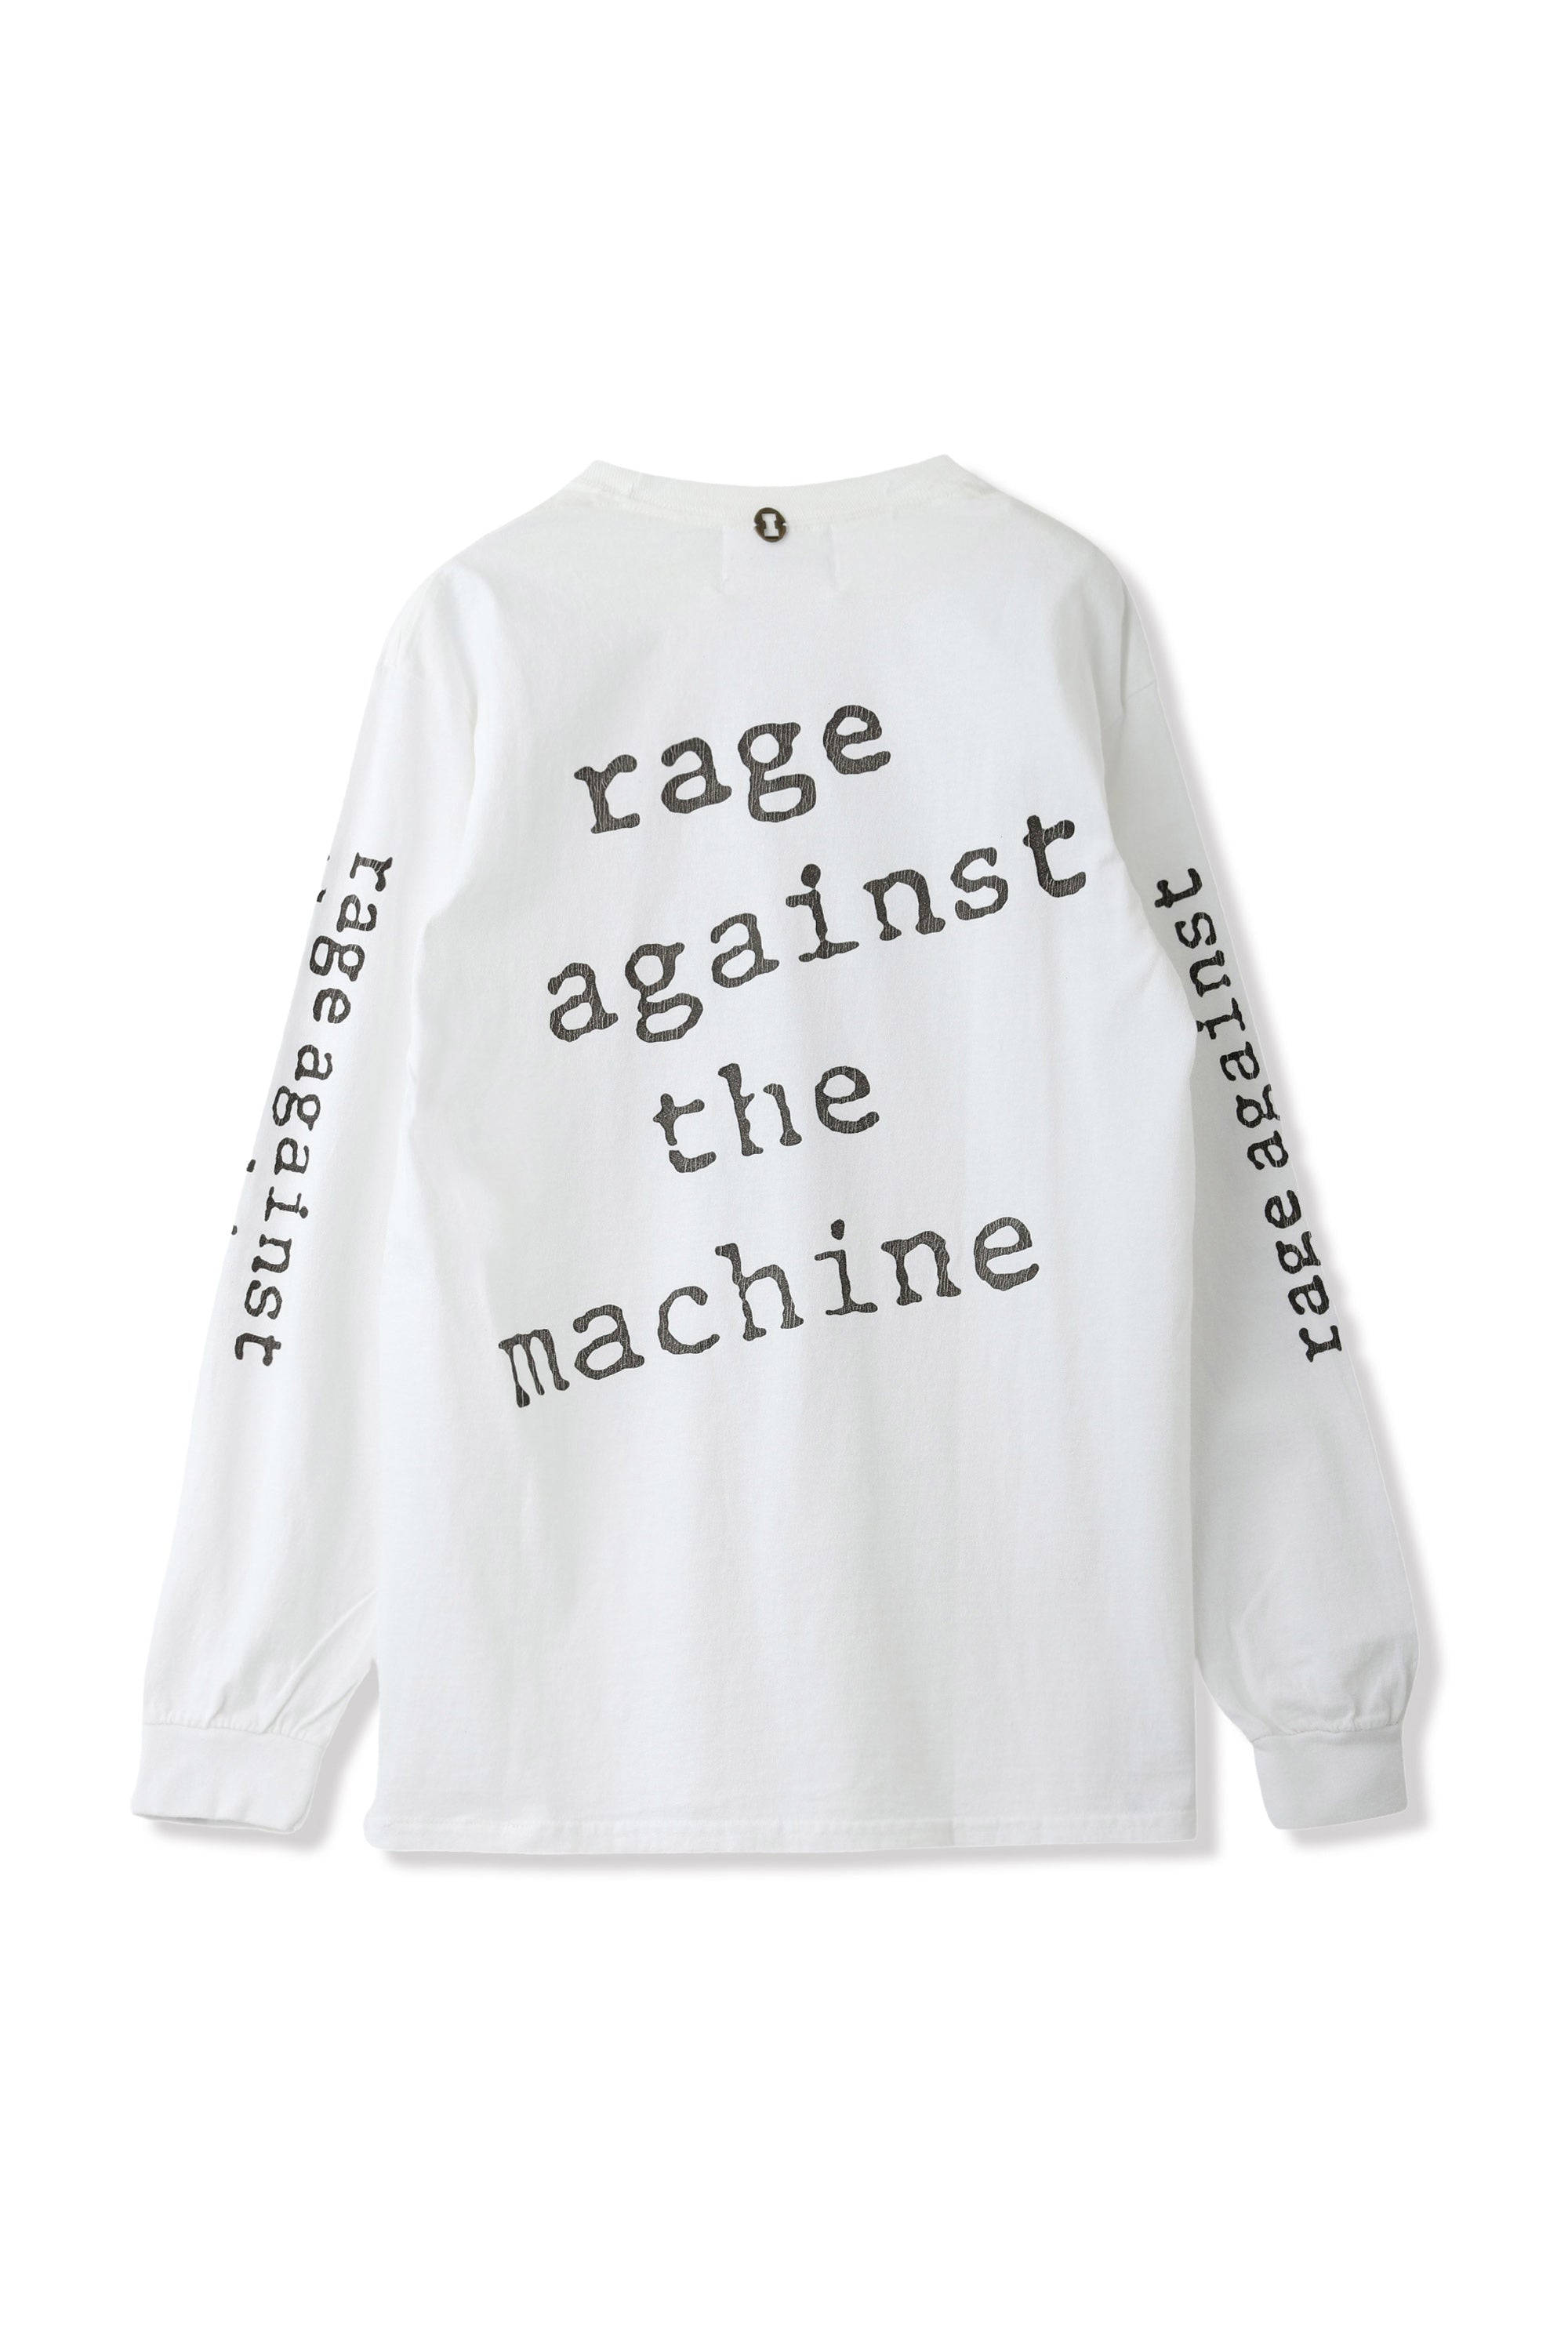 × RAGE AGAINST THE MACHINE THE BATTLE OF LOS ANGELES 1999 LS TEE